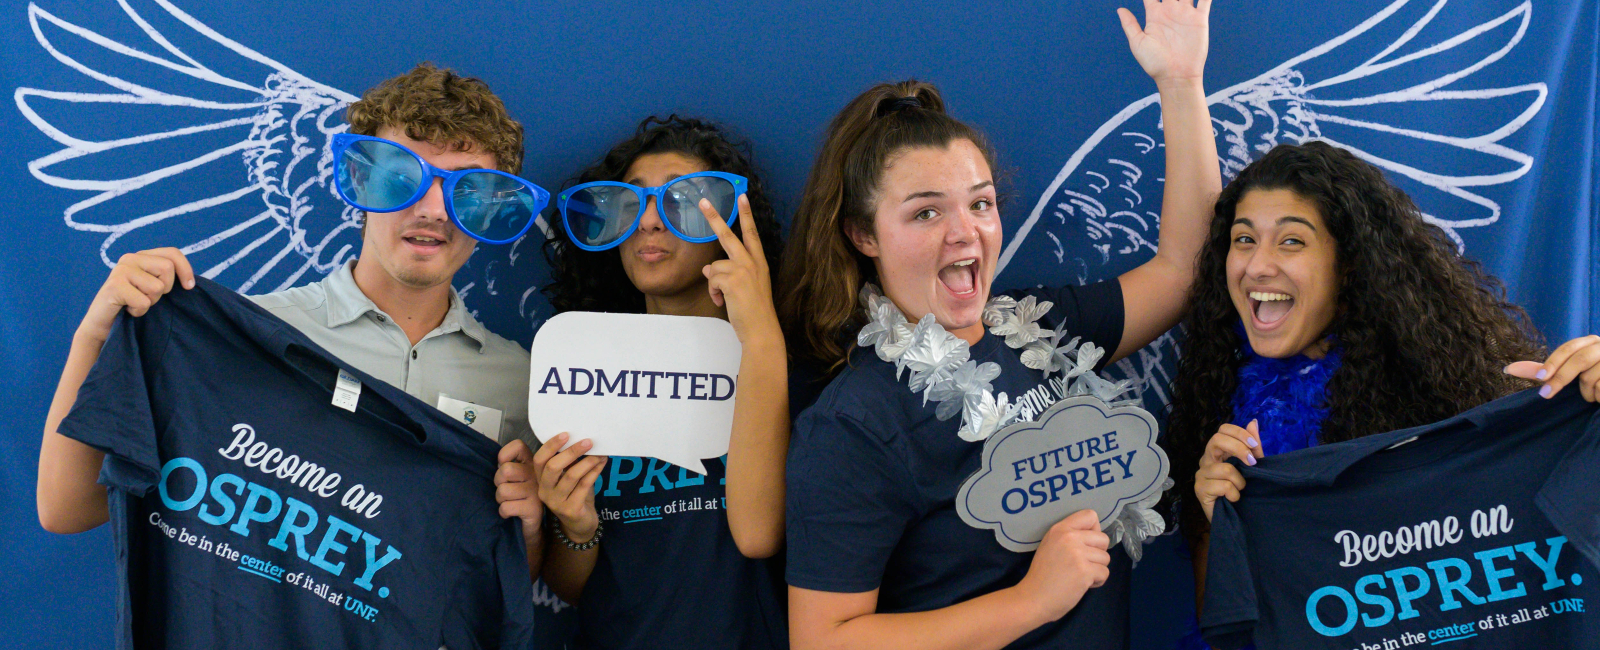 Four new UNF students in a photo booth holding UNF signs and striking crazy poses